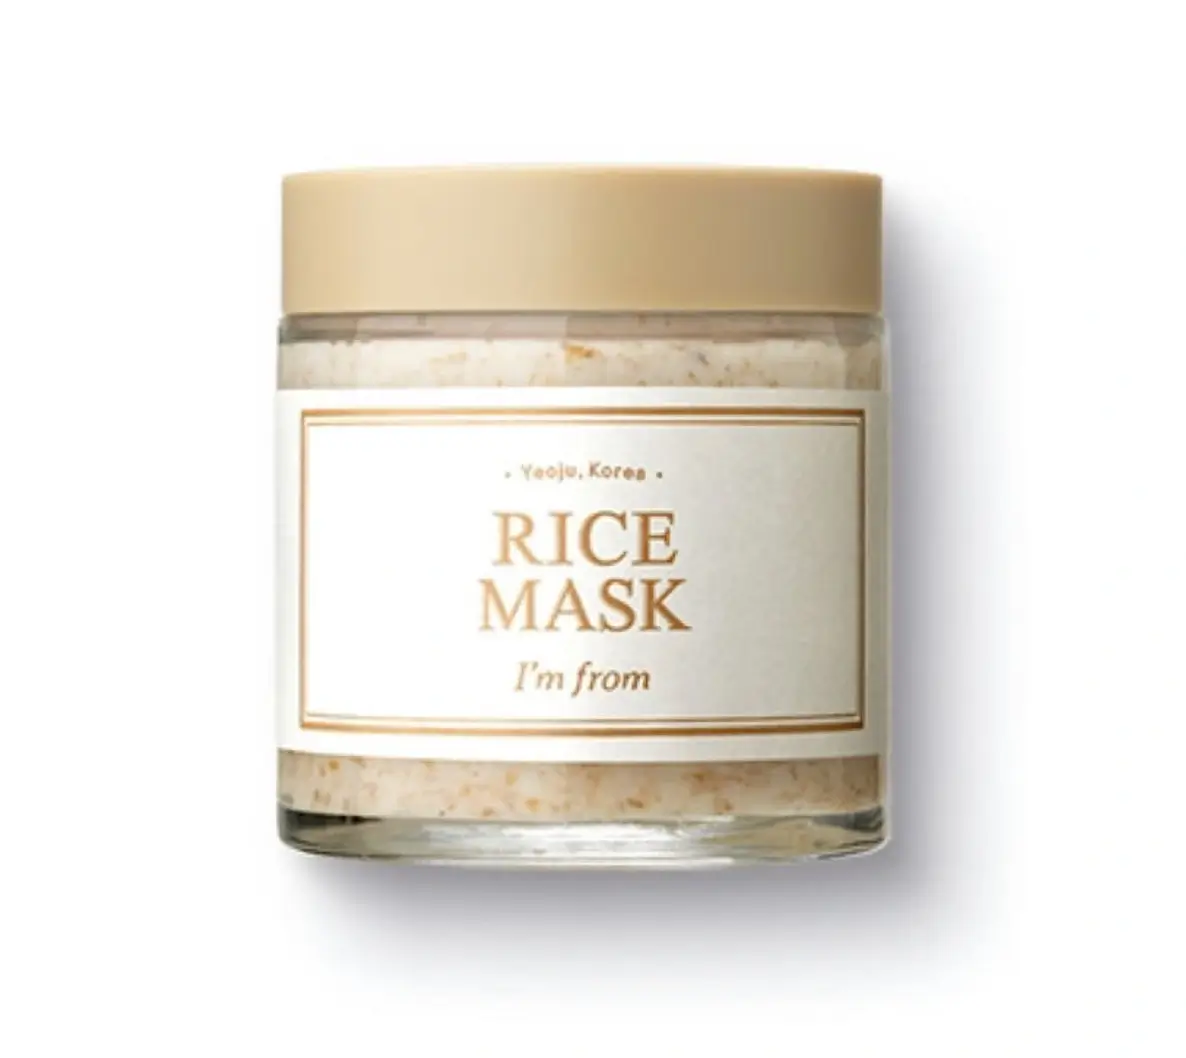 Best Korean Skincare Products, Best Korean Skincare Mask: I'm From Rice Mask